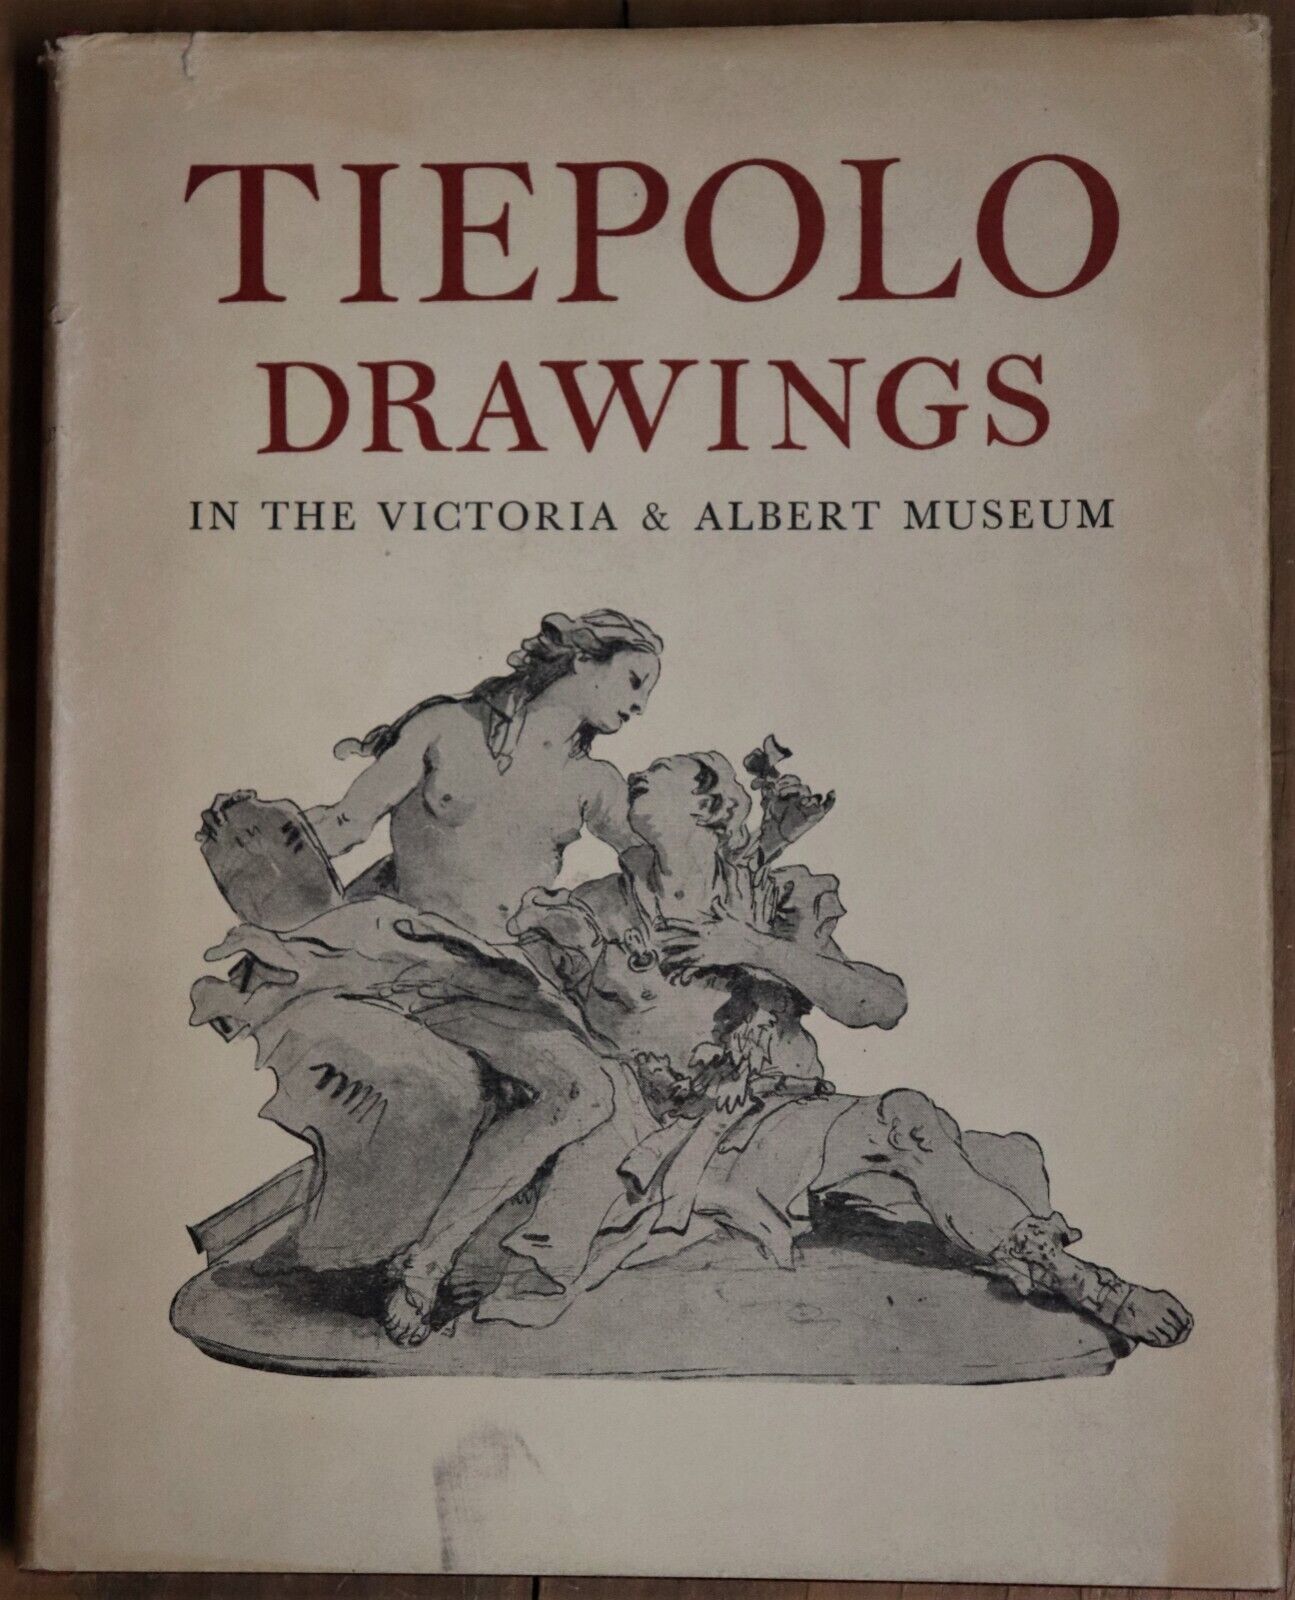 Catalogue Of Tiepolo Drawings In The Victoria & Albert Museum - 1960 Art Book